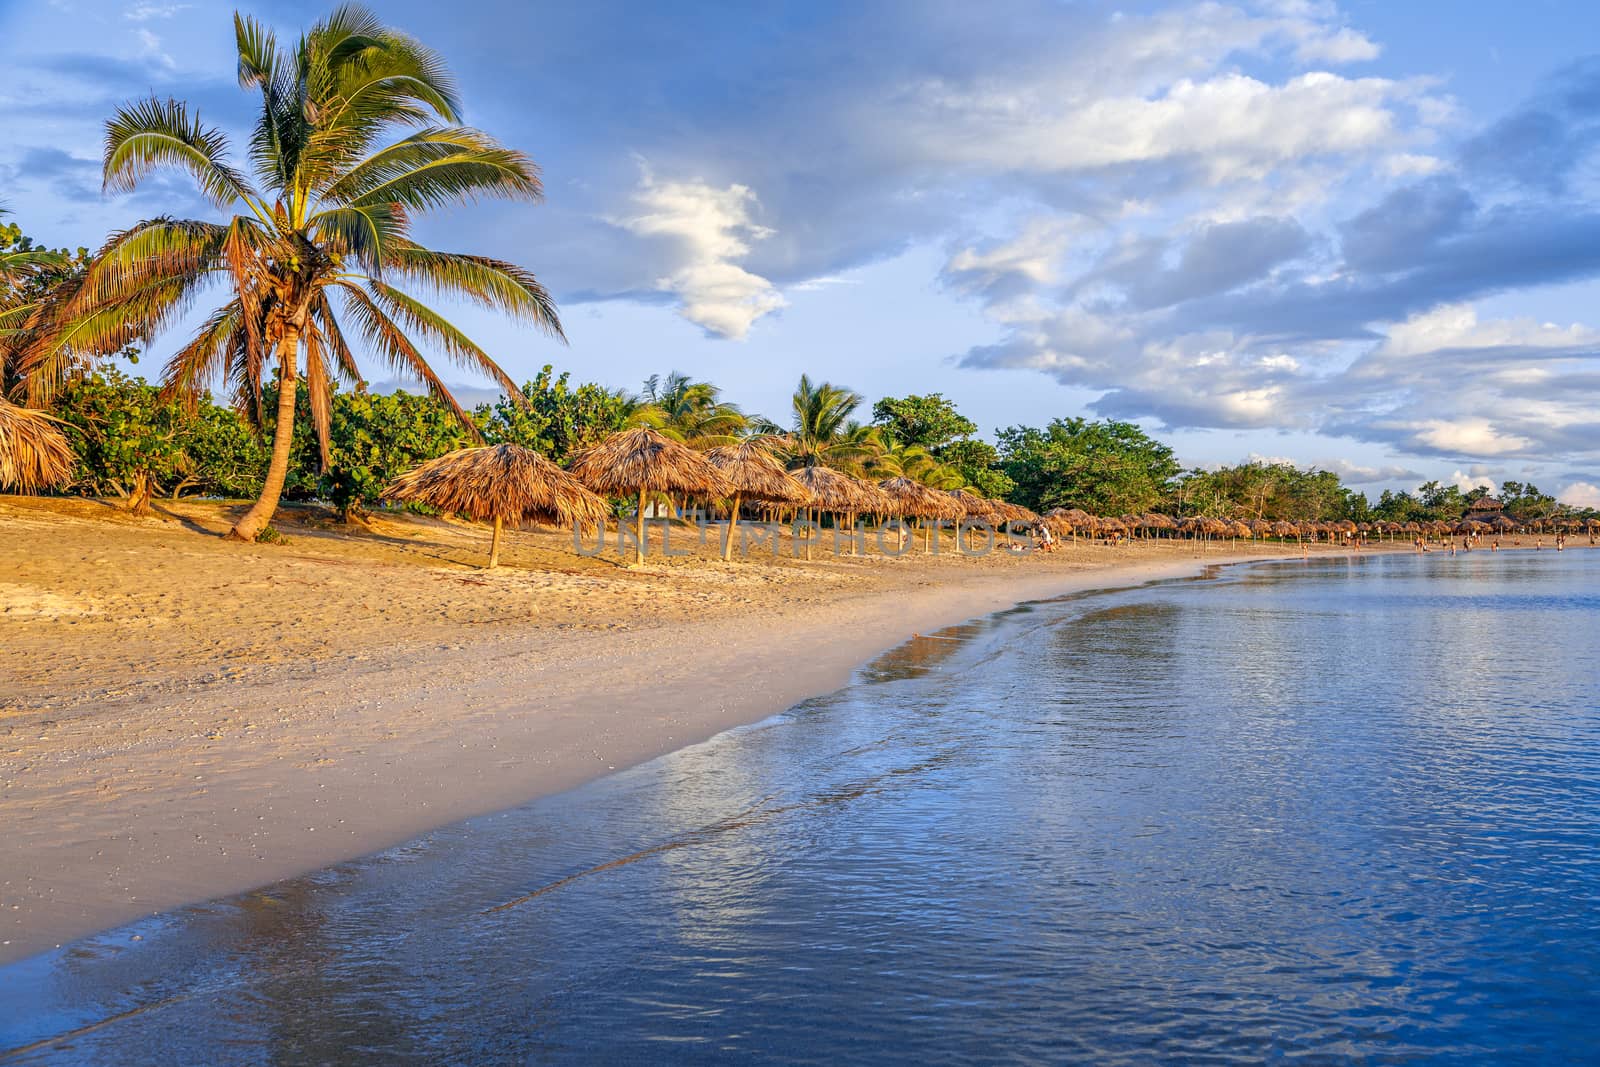 Rancho Luna caribbean beach with palms and straw umrellas on the by ambeon